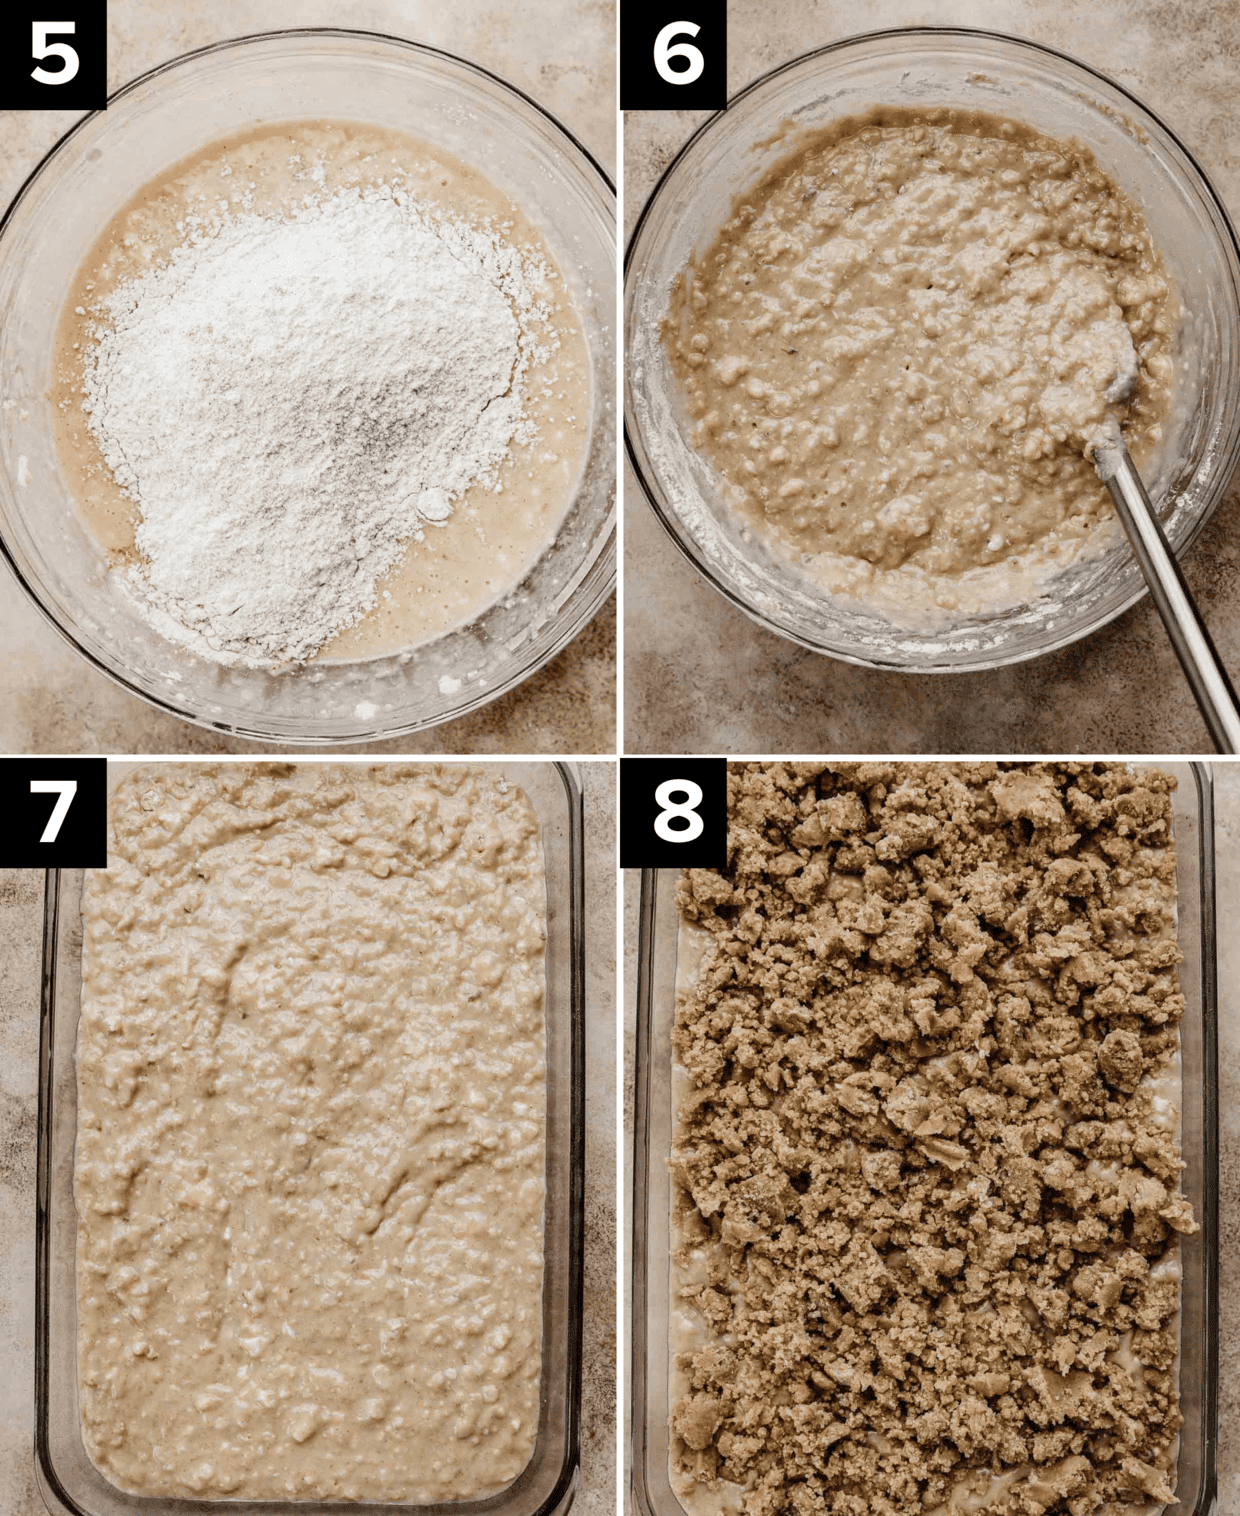 Four images showing how to make Banana Coffee Cake, top left image is banana coffee cake batter topped with flour, top right is Banana Coffee Cake batter in glass bowl, bottom left photo is banana coffee cake batter in rectangle pan, bottom right photo is Banana Coffee Cake topped with streusel topping.